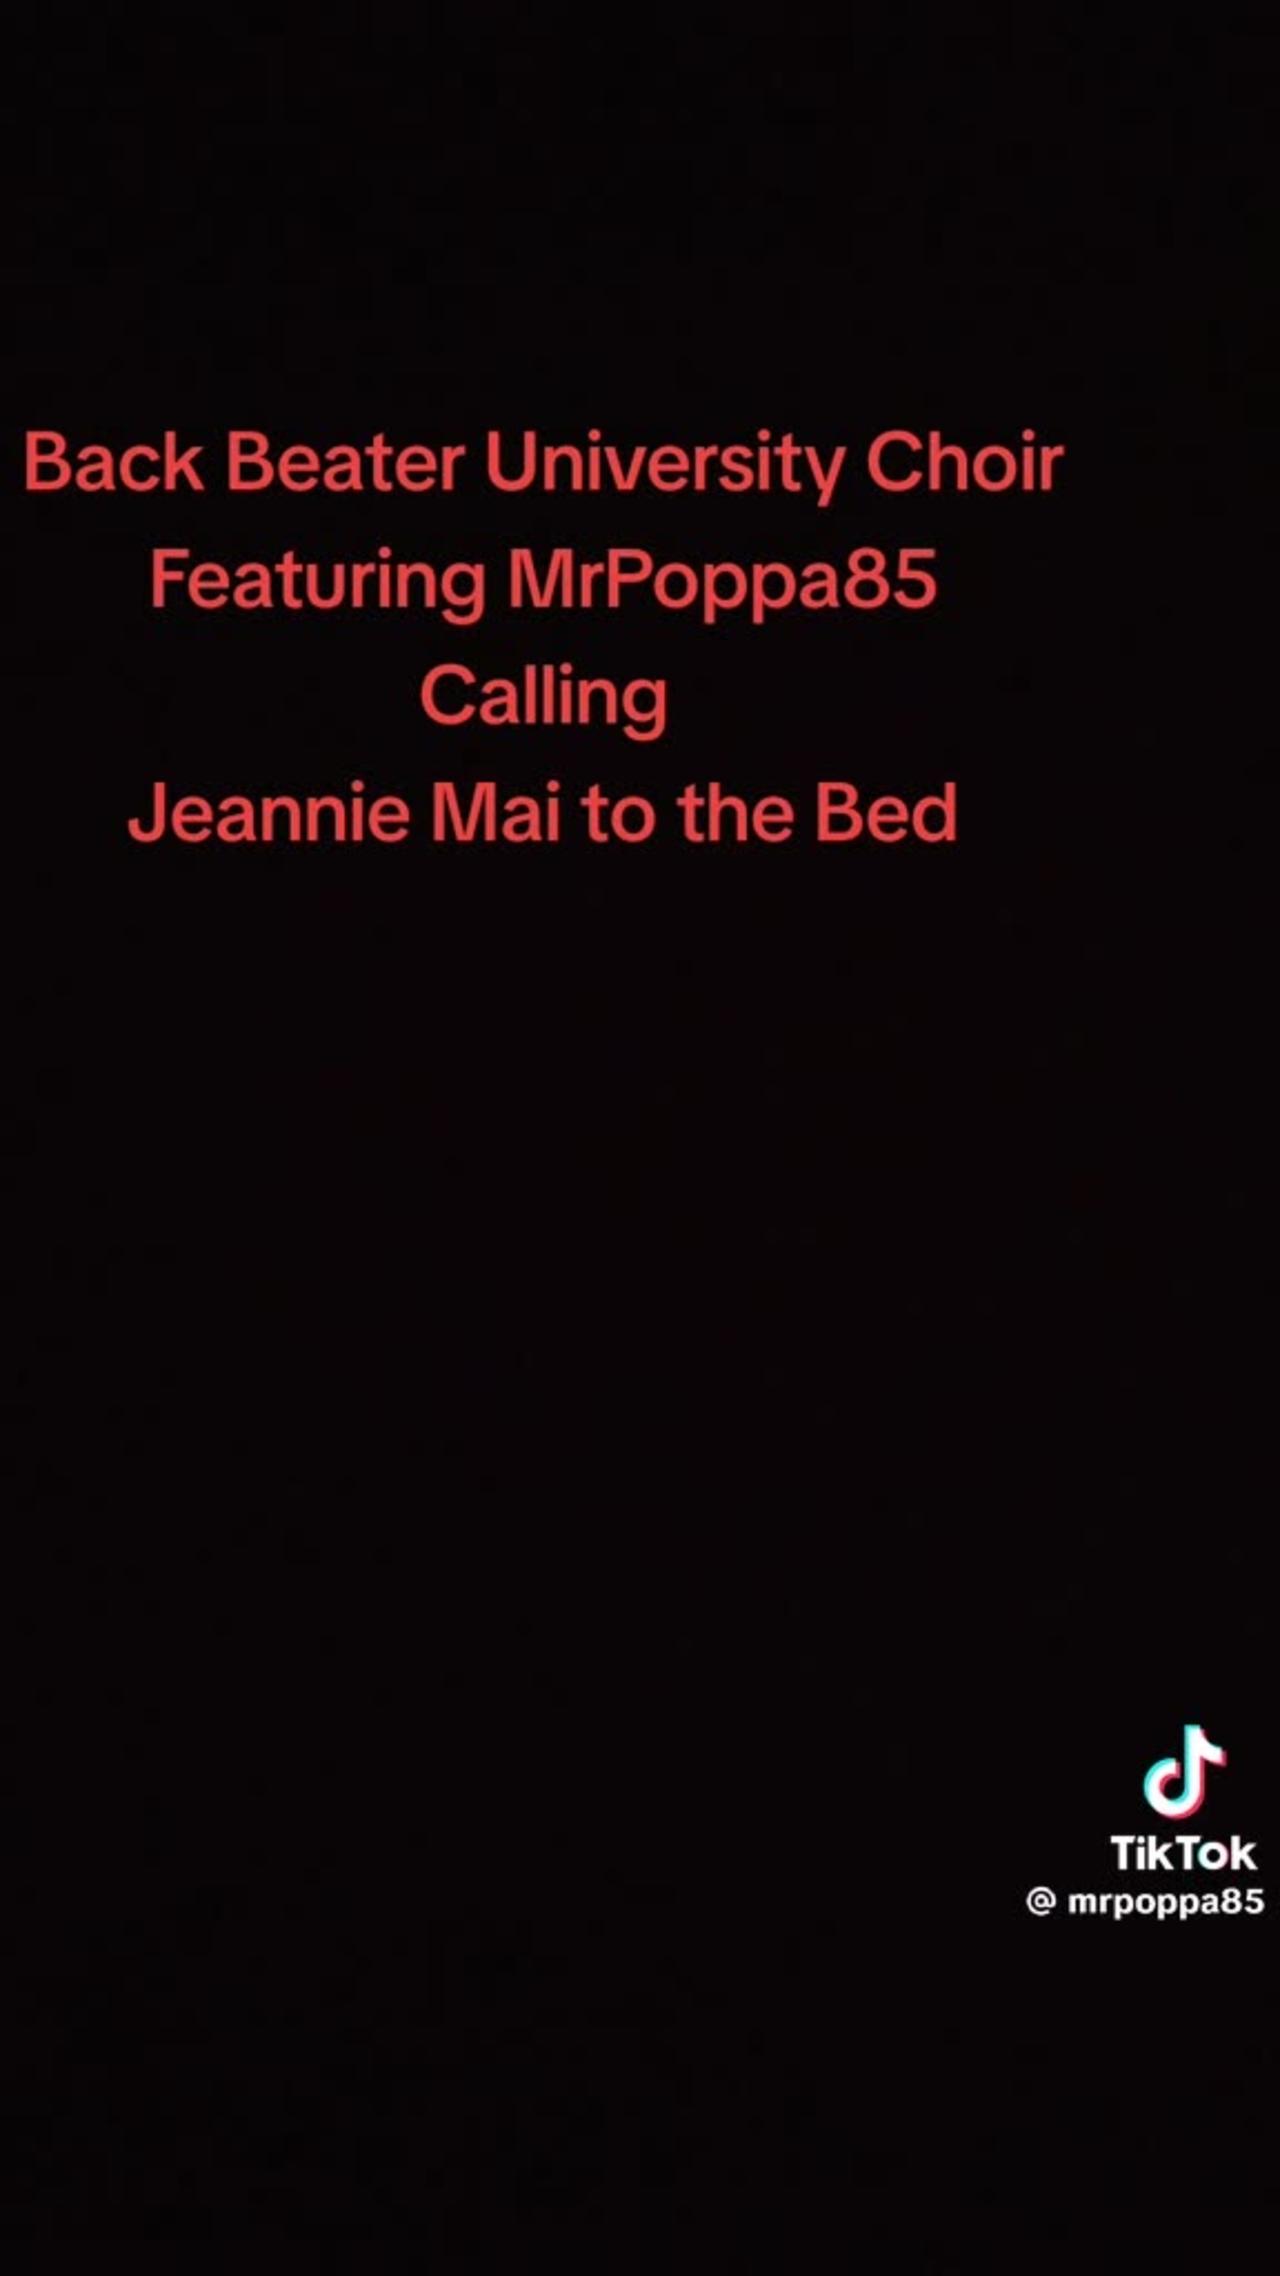 Back Beater University Choir featuring Mrpoppa85 Calling Jeannie Mai to the Bed